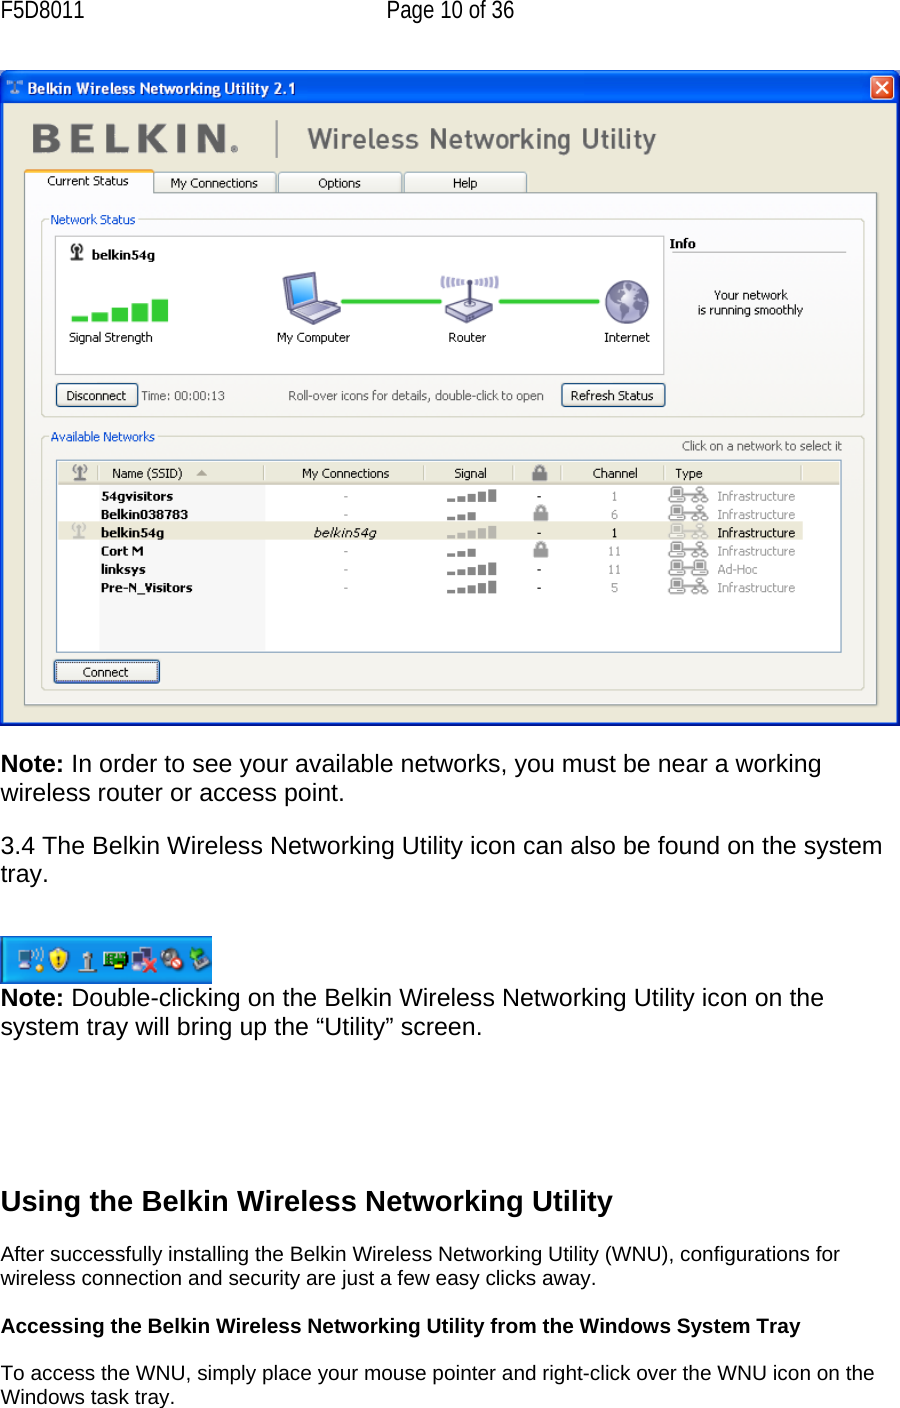 F5D8011  Page 10 of 36   Note: In order to see your available networks, you must be near a working wireless router or access point.  3.4 The Belkin Wireless Networking Utility icon can also be found on the system tray.    Note: Double-clicking on the Belkin Wireless Networking Utility icon on the system tray will bring up the “Utility” screen.       Using the Belkin Wireless Networking Utility   After successfully installing the Belkin Wireless Networking Utility (WNU), configurations for wireless connection and security are just a few easy clicks away.  Accessing the Belkin Wireless Networking Utility from the Windows System Tray  To access the WNU, simply place your mouse pointer and right-click over the WNU icon on the Windows task tray.  